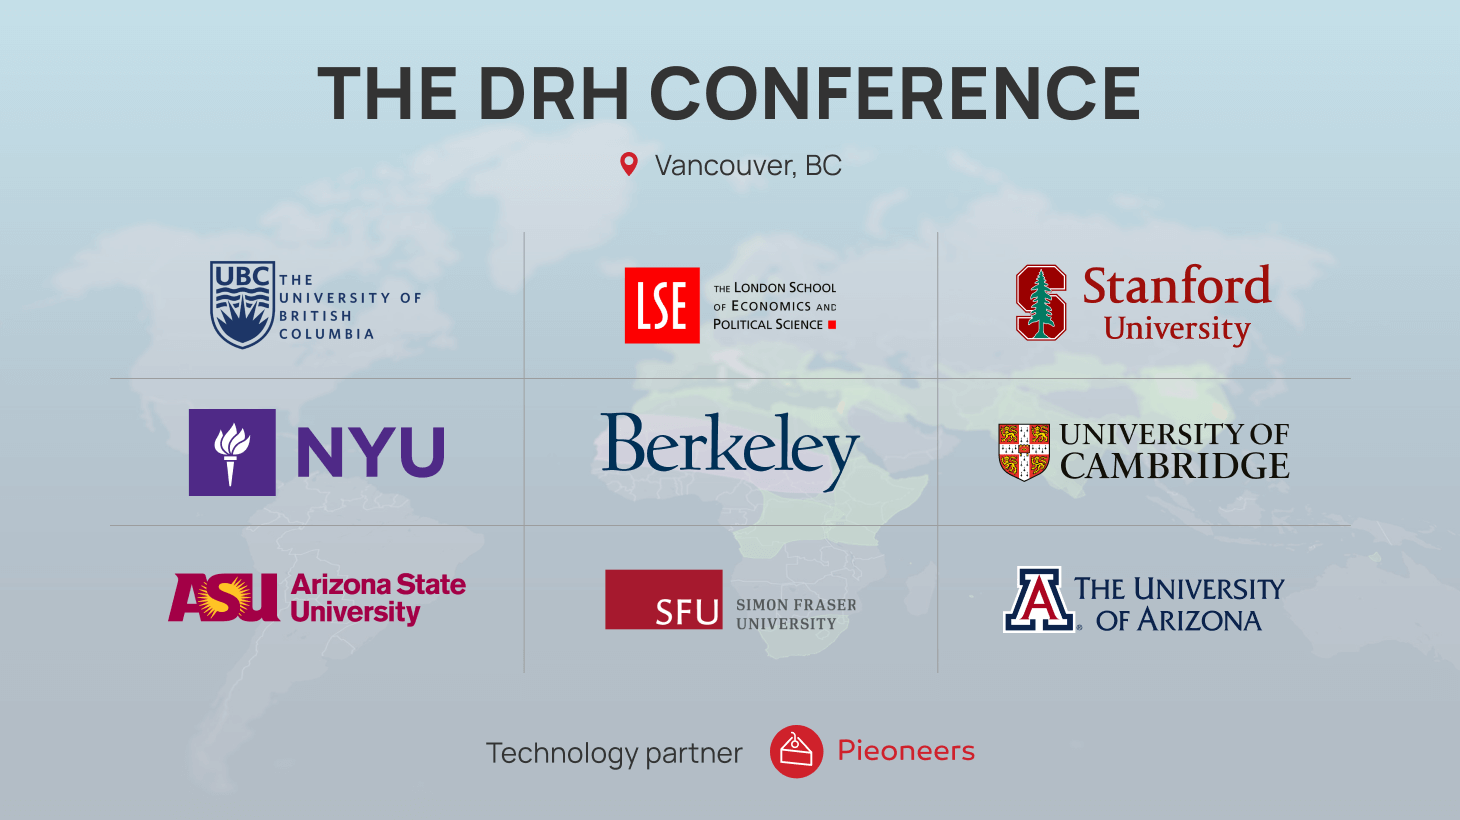 Logos of universities on the DRH conference background